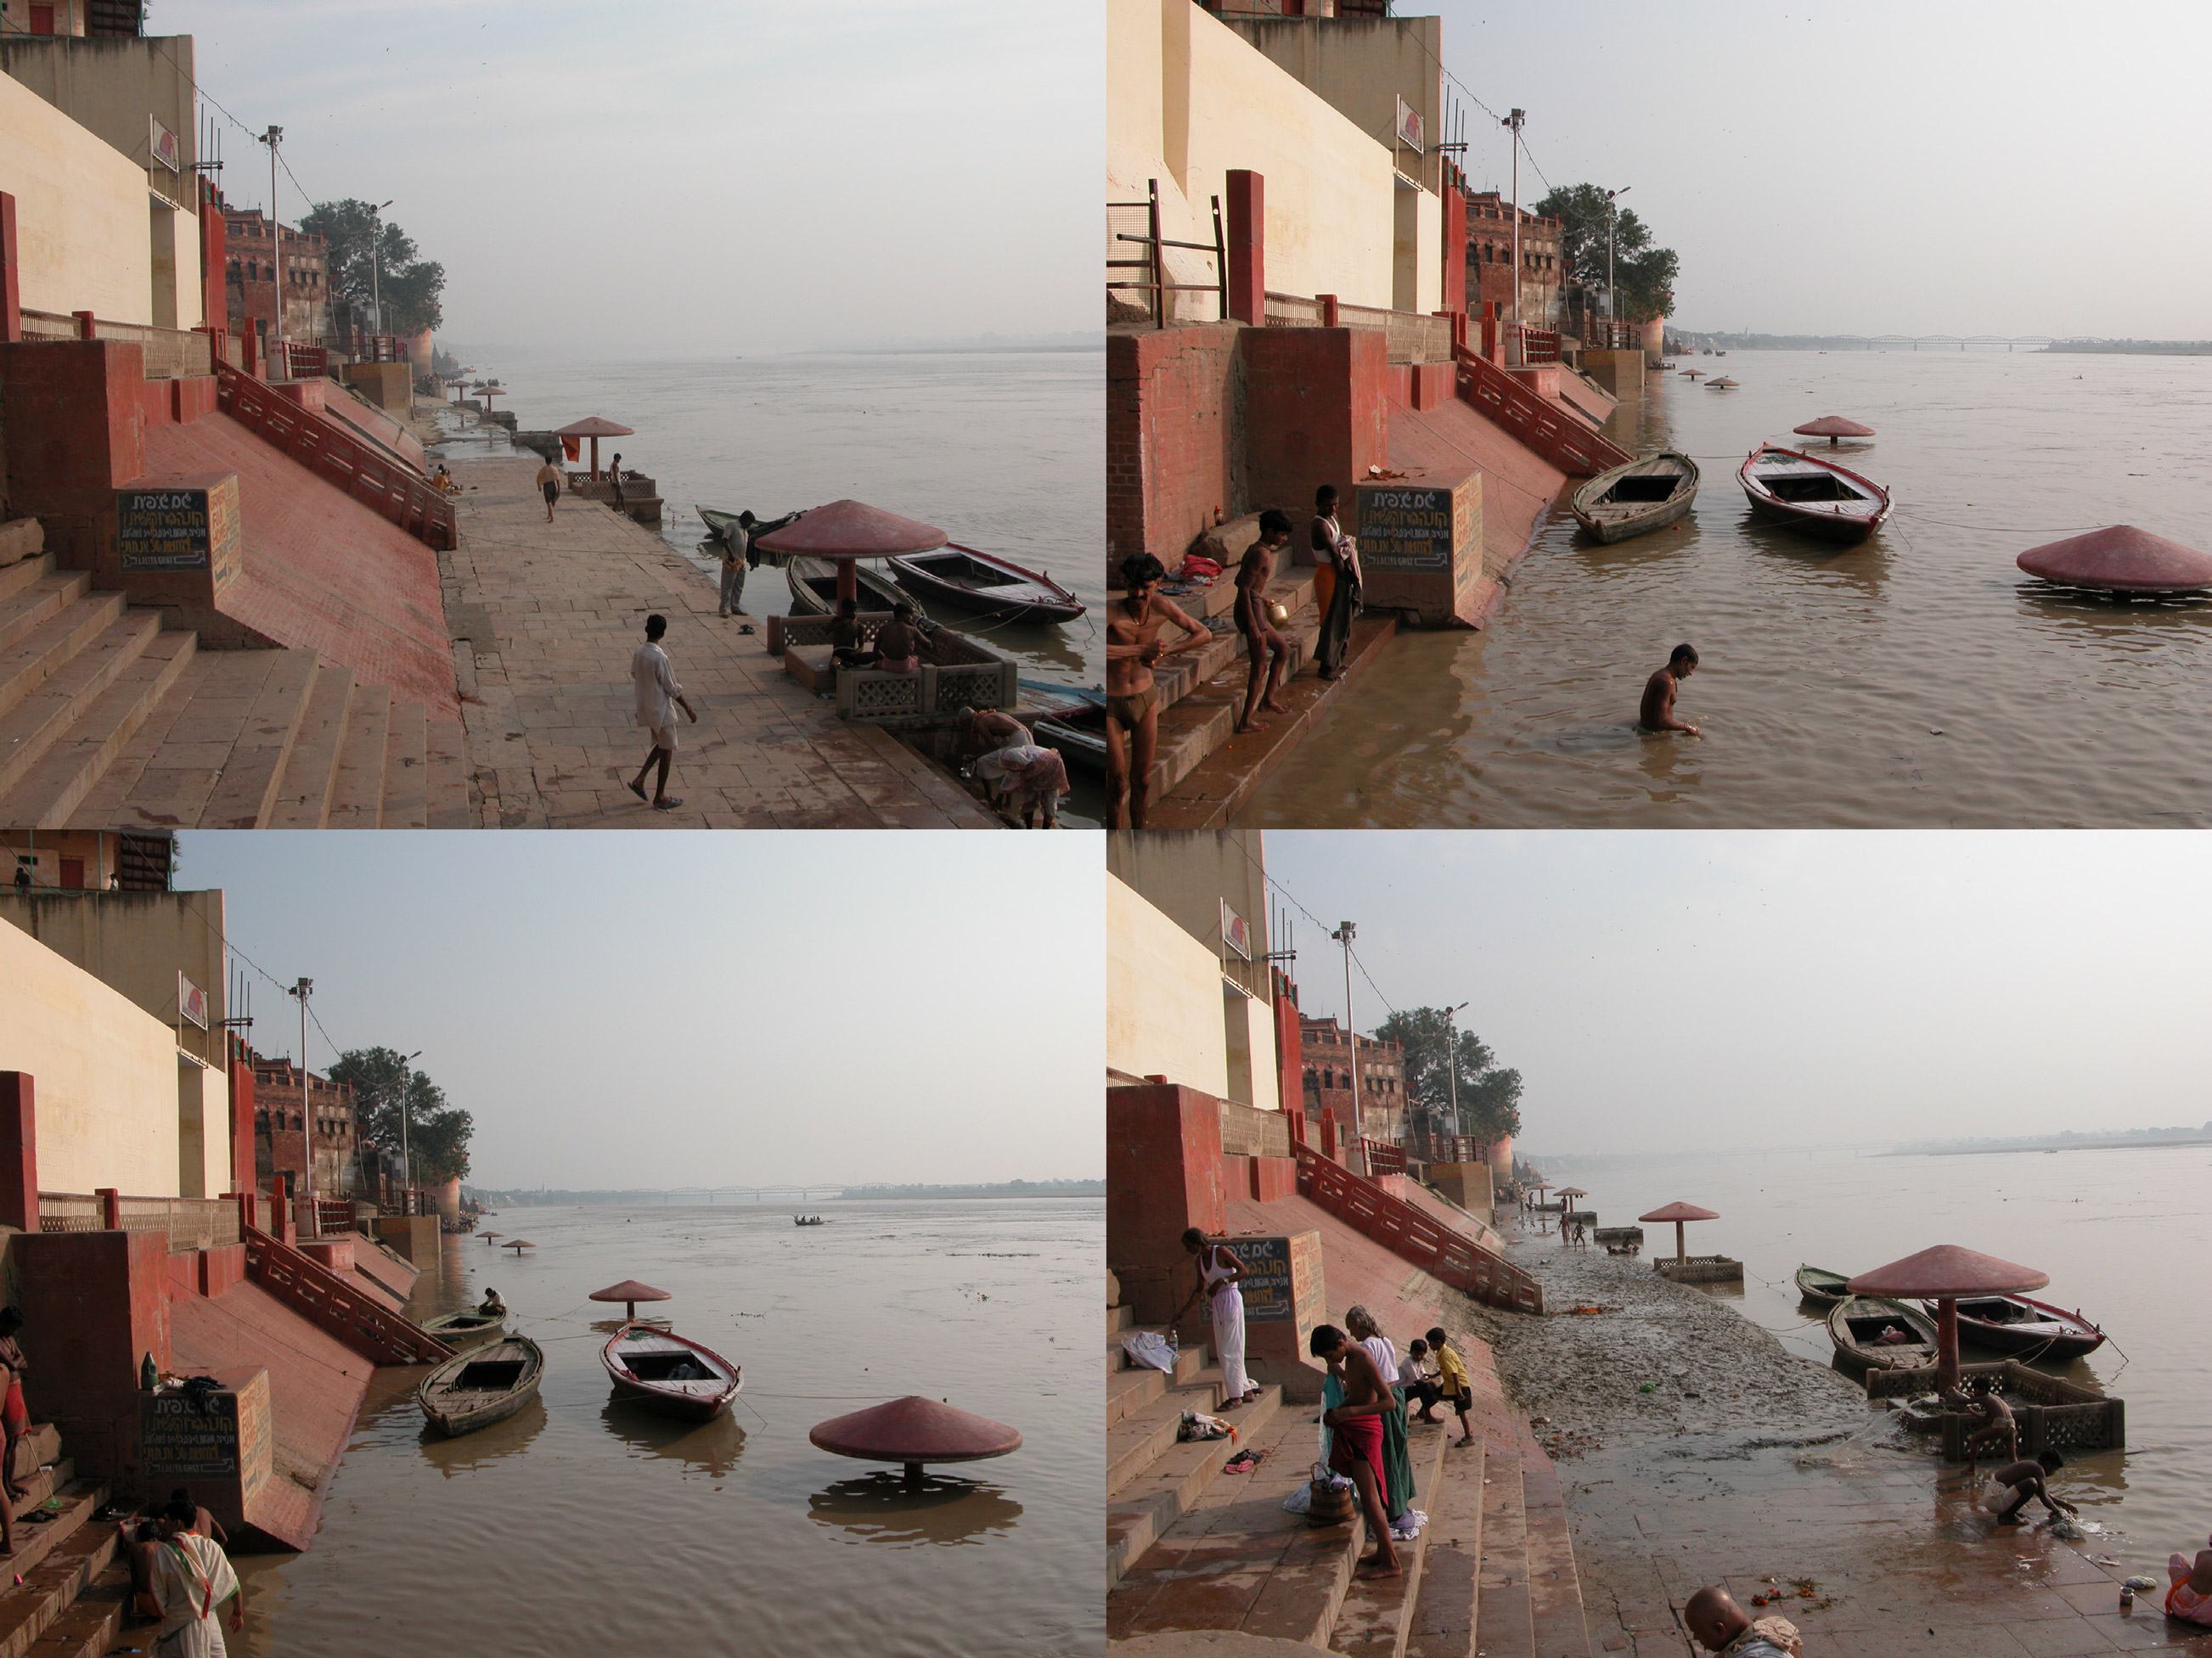 Dynamic change of water levels at the Meer Ghat, Varanasi, Uttar Pradesh. Clockwise from the top left: October 11-14, 2005. Photo: Anthony Acciavatti.